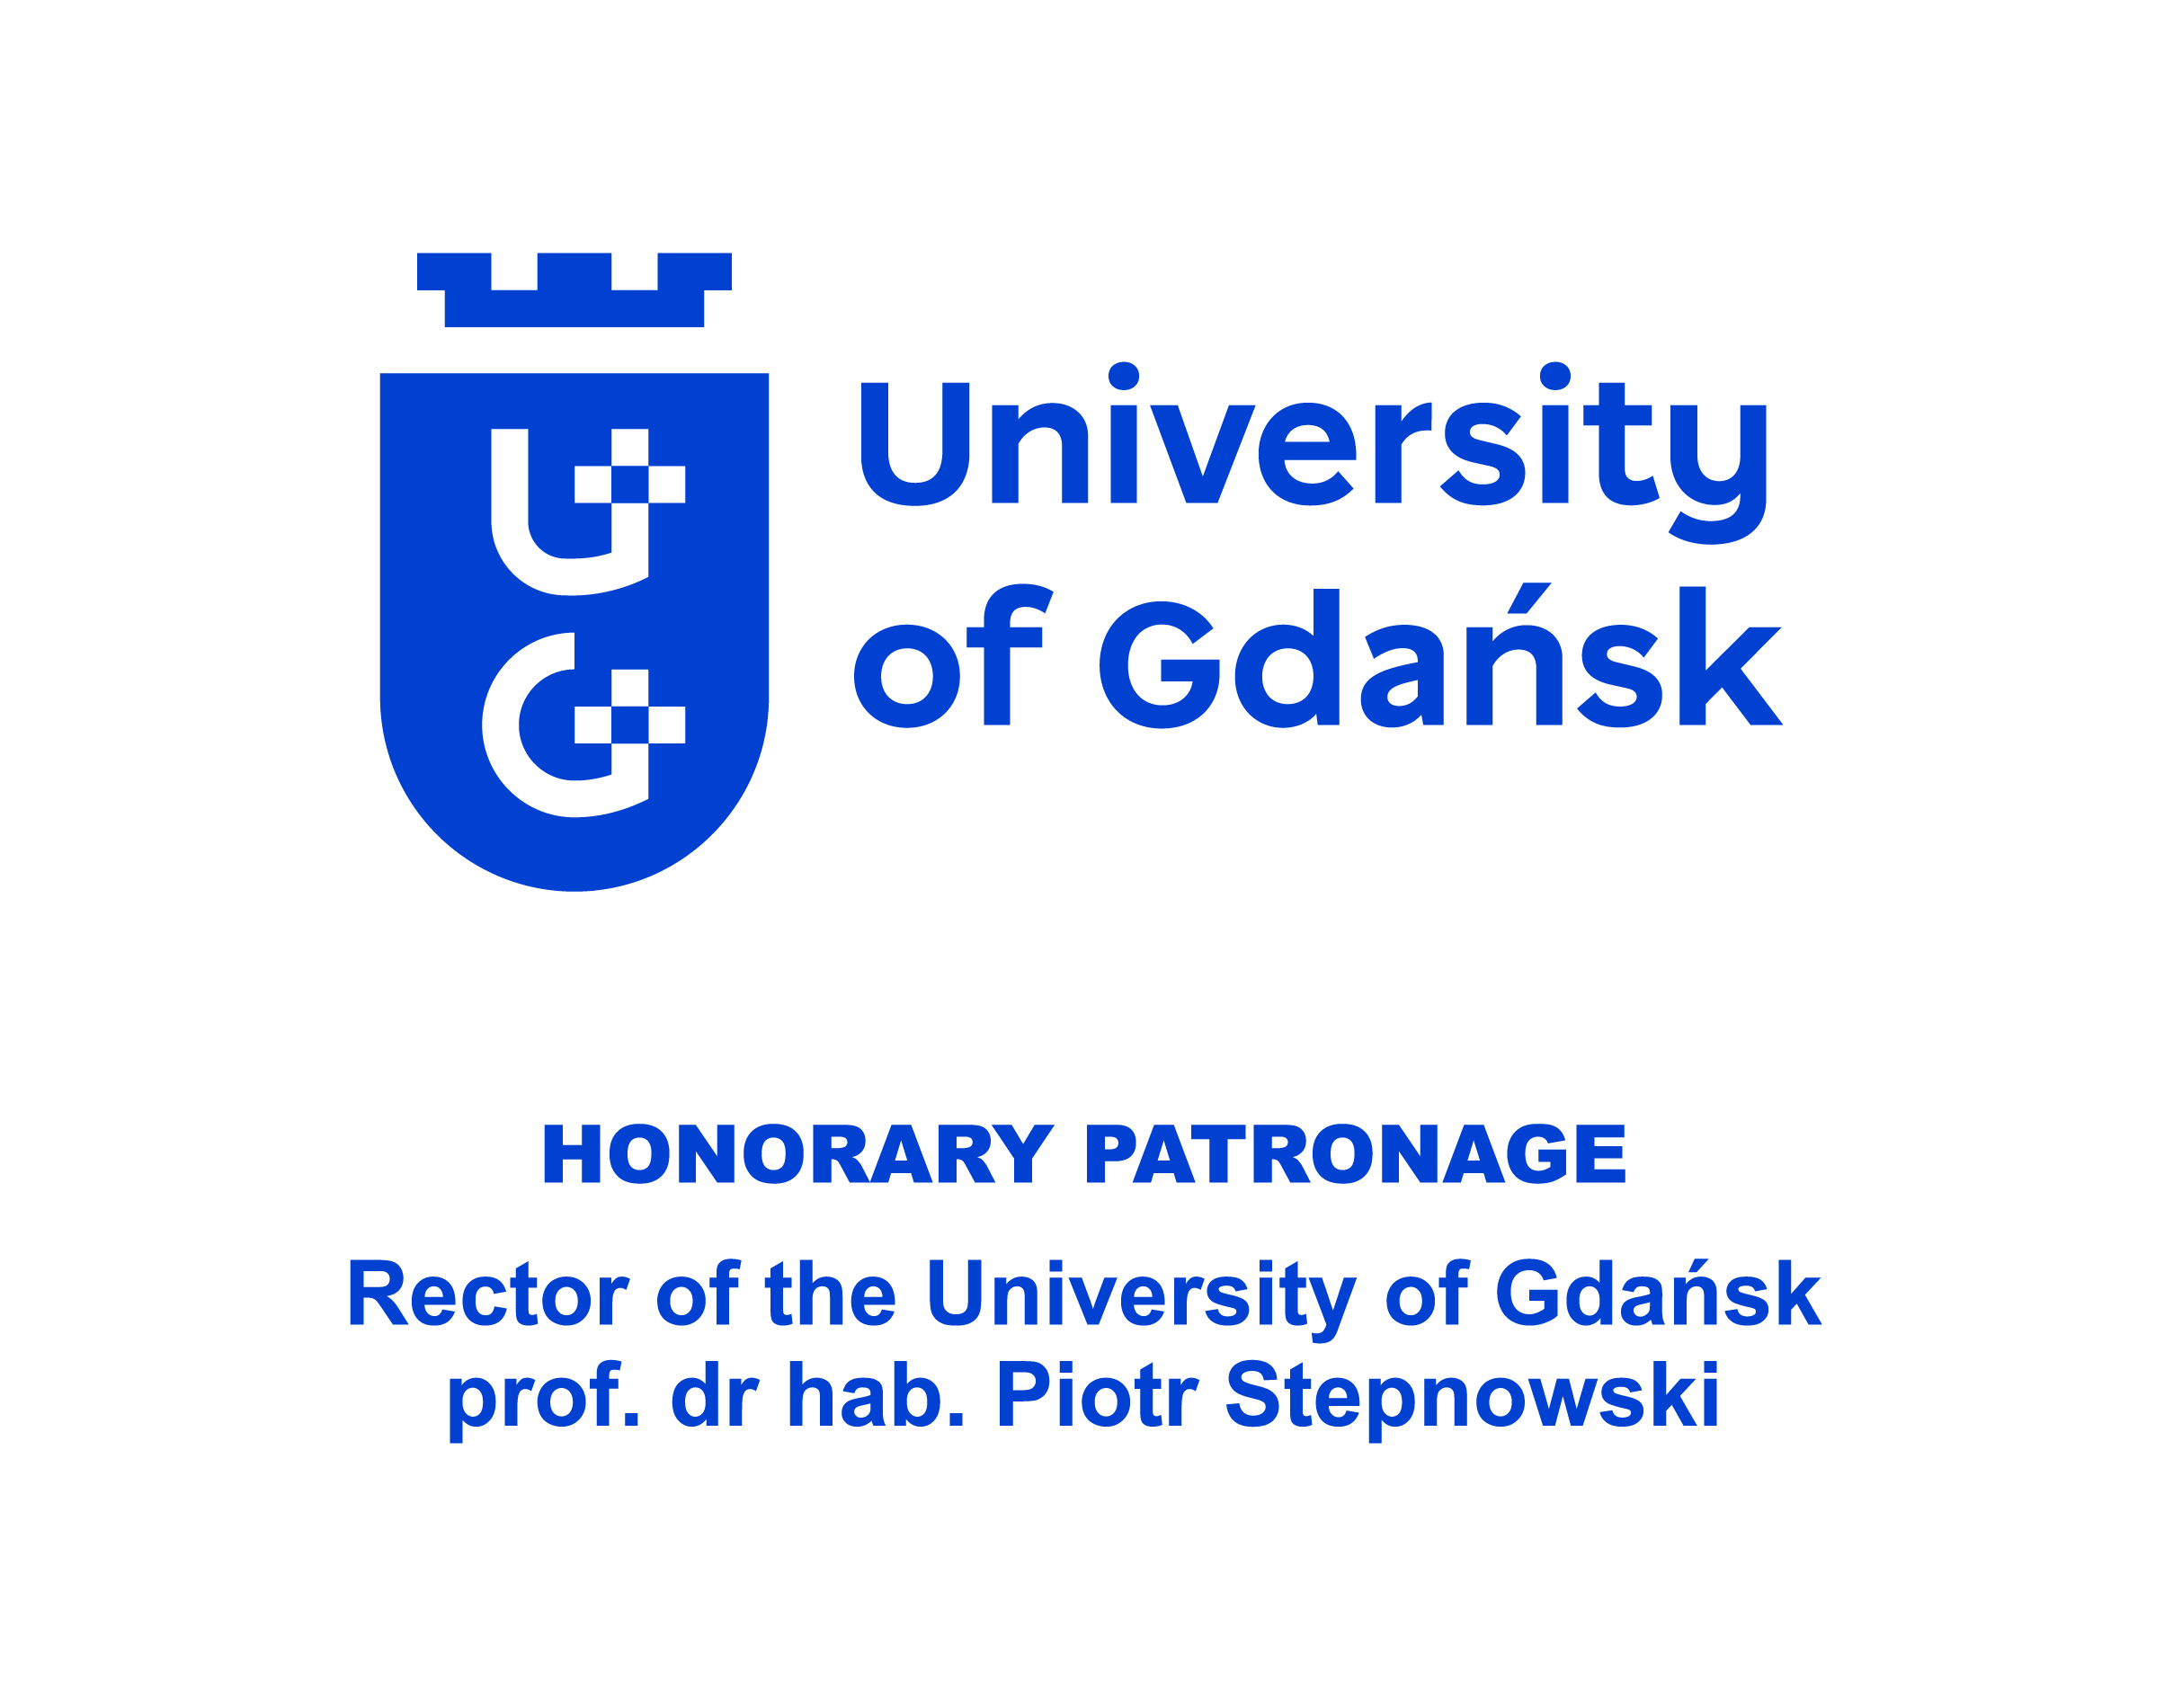 University of Gdansk, Honorary Patronage of Rector